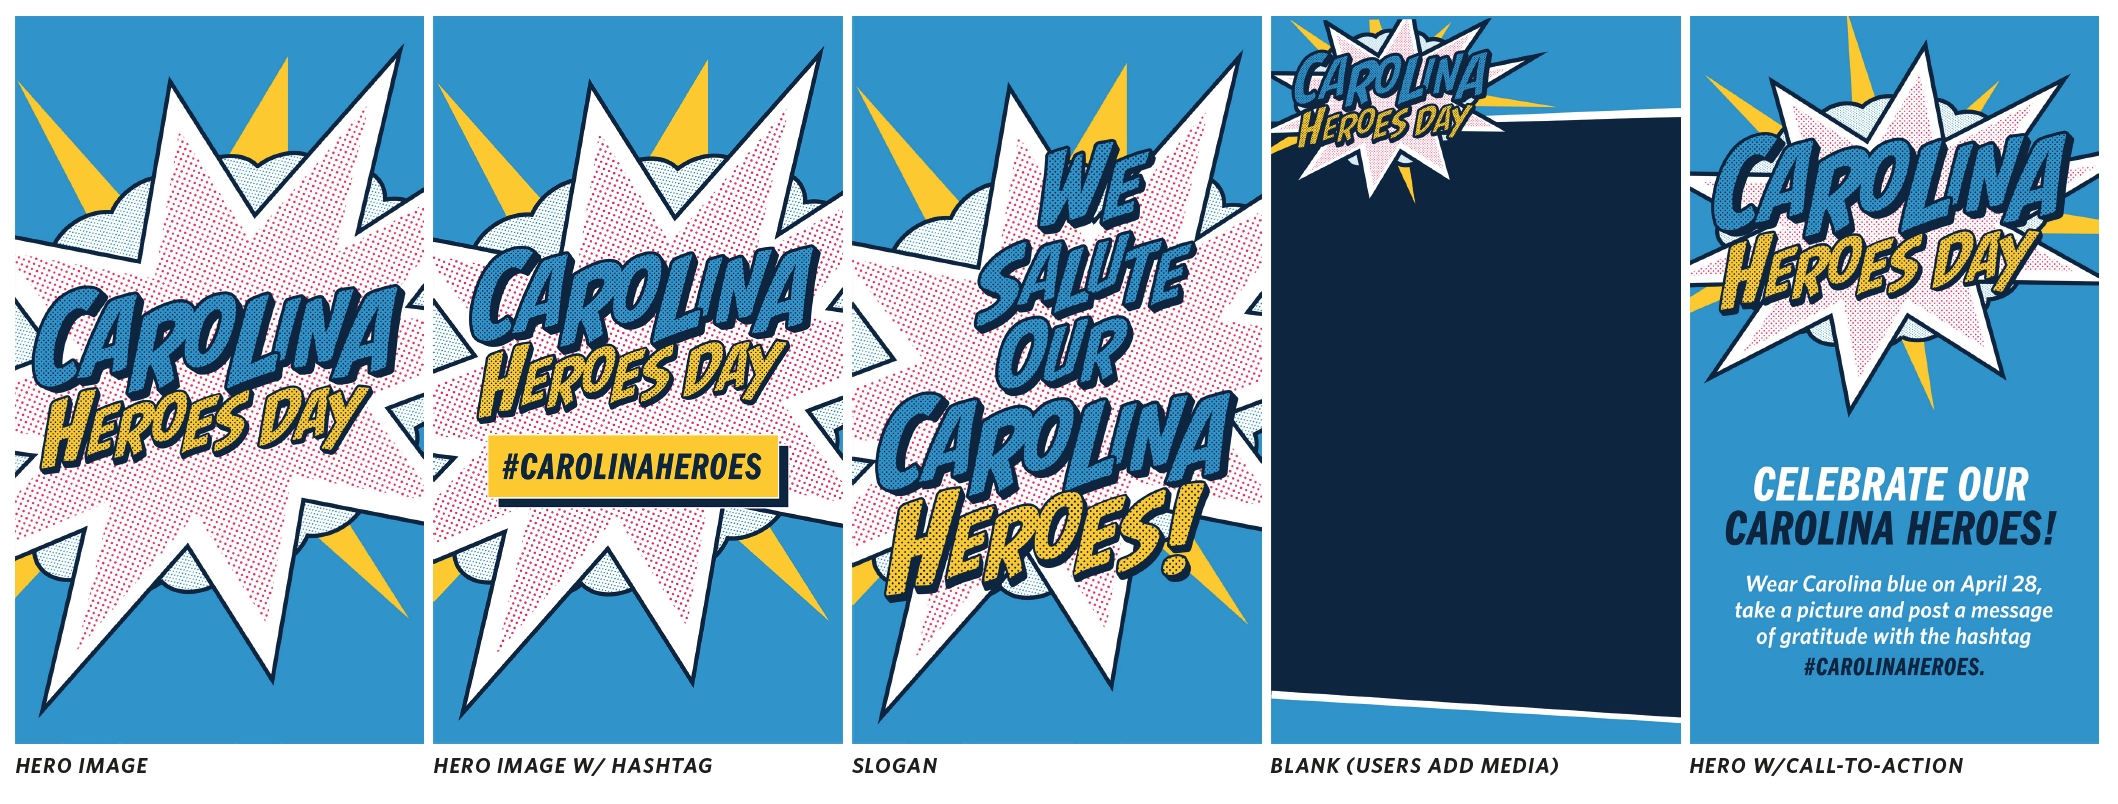 Instagram Stories graphics that featured the Carolina Heroes branding.